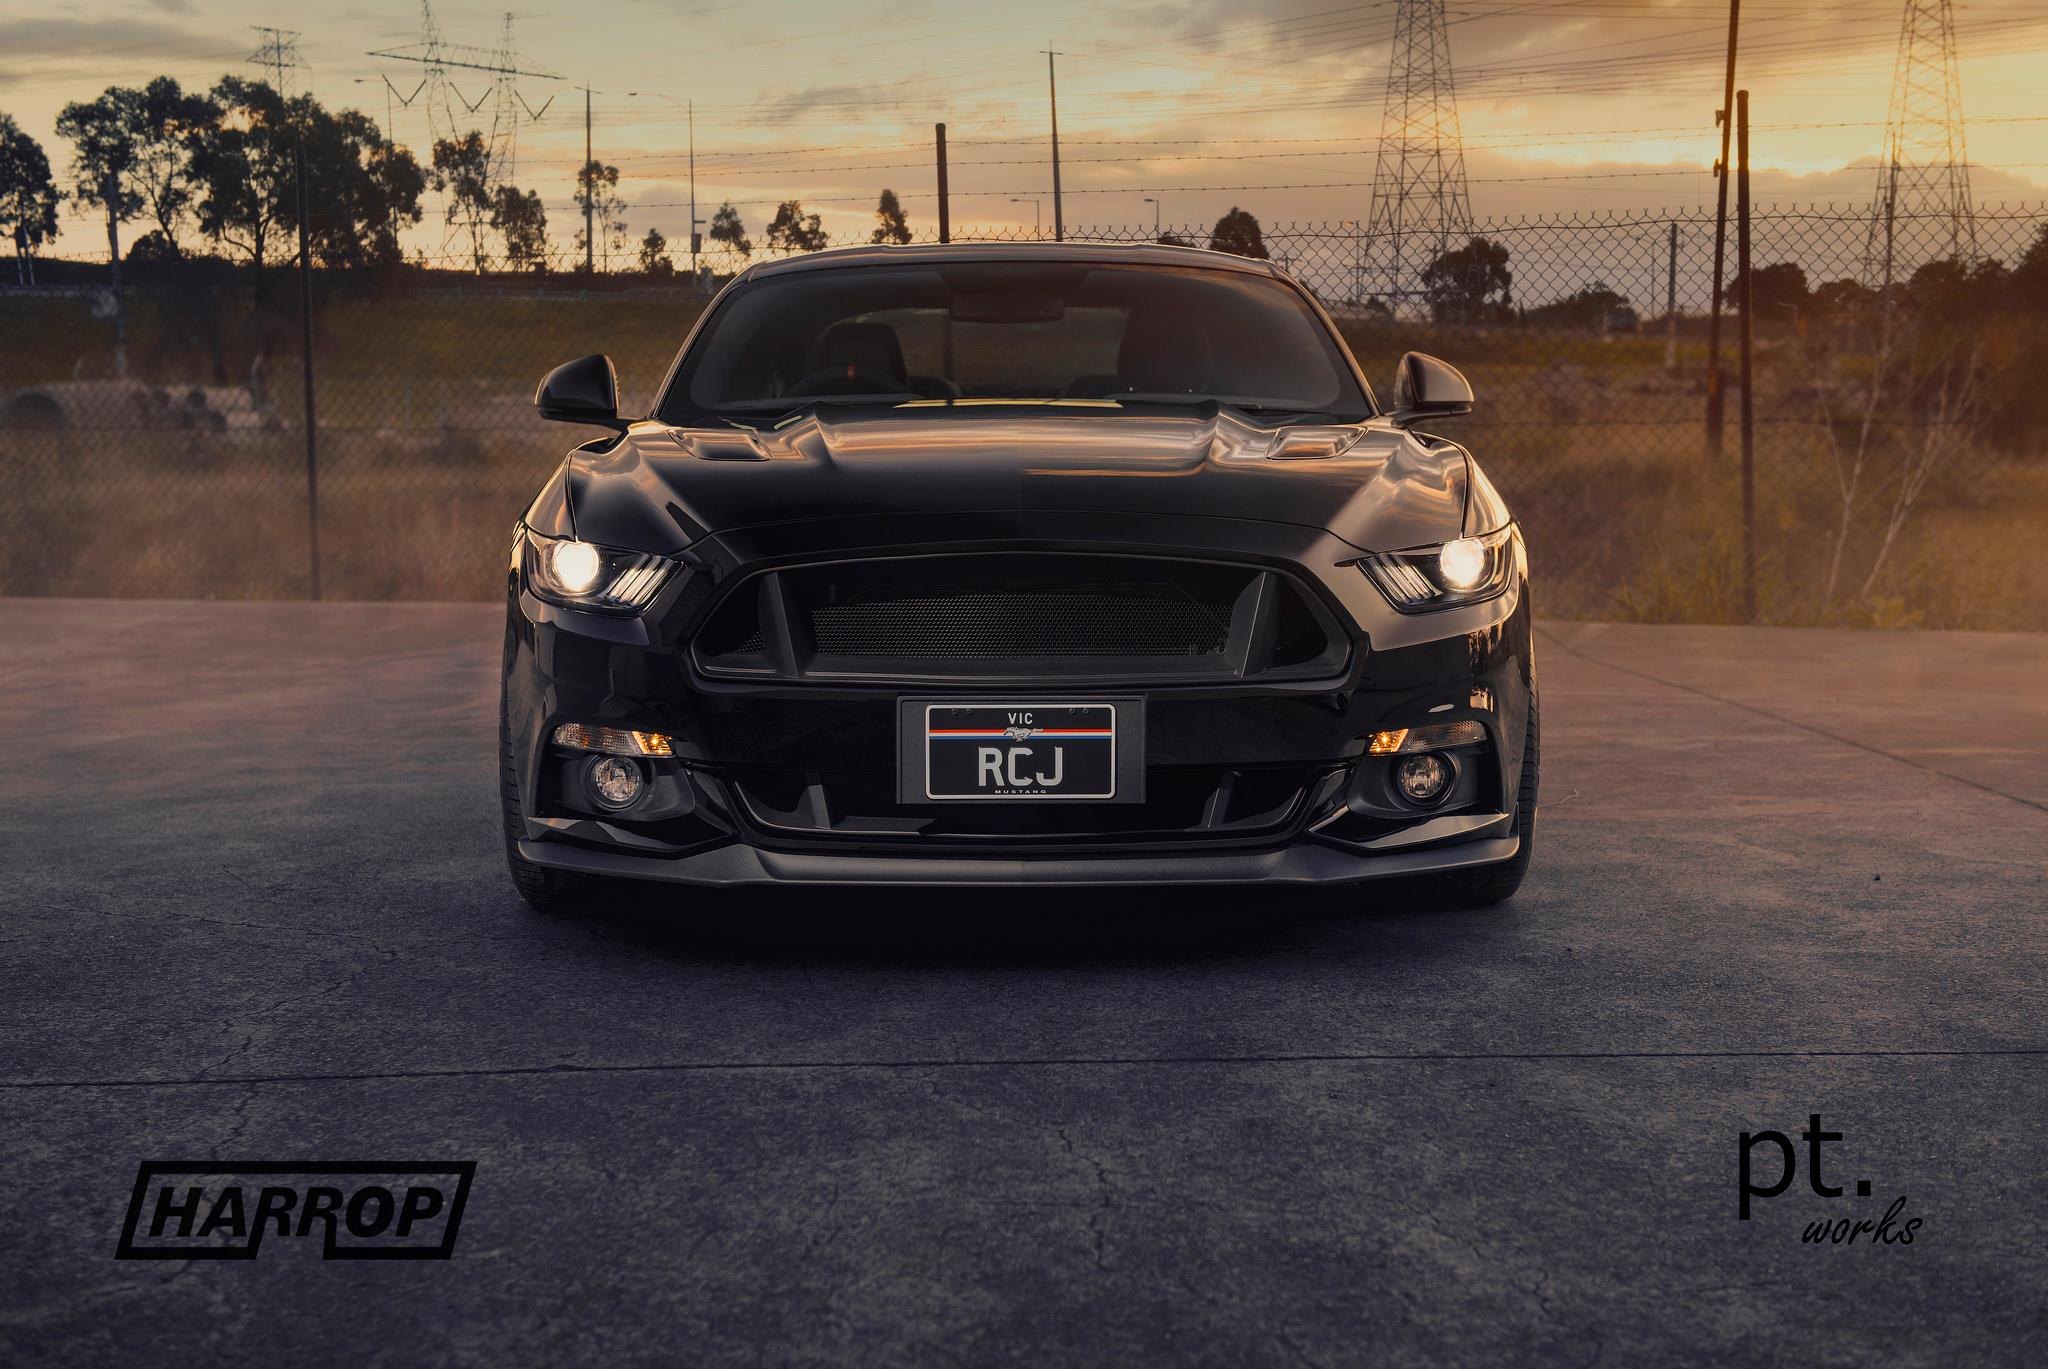 Front Bumper with Fog Lights on Black Ford Mustang - Photo by PT works